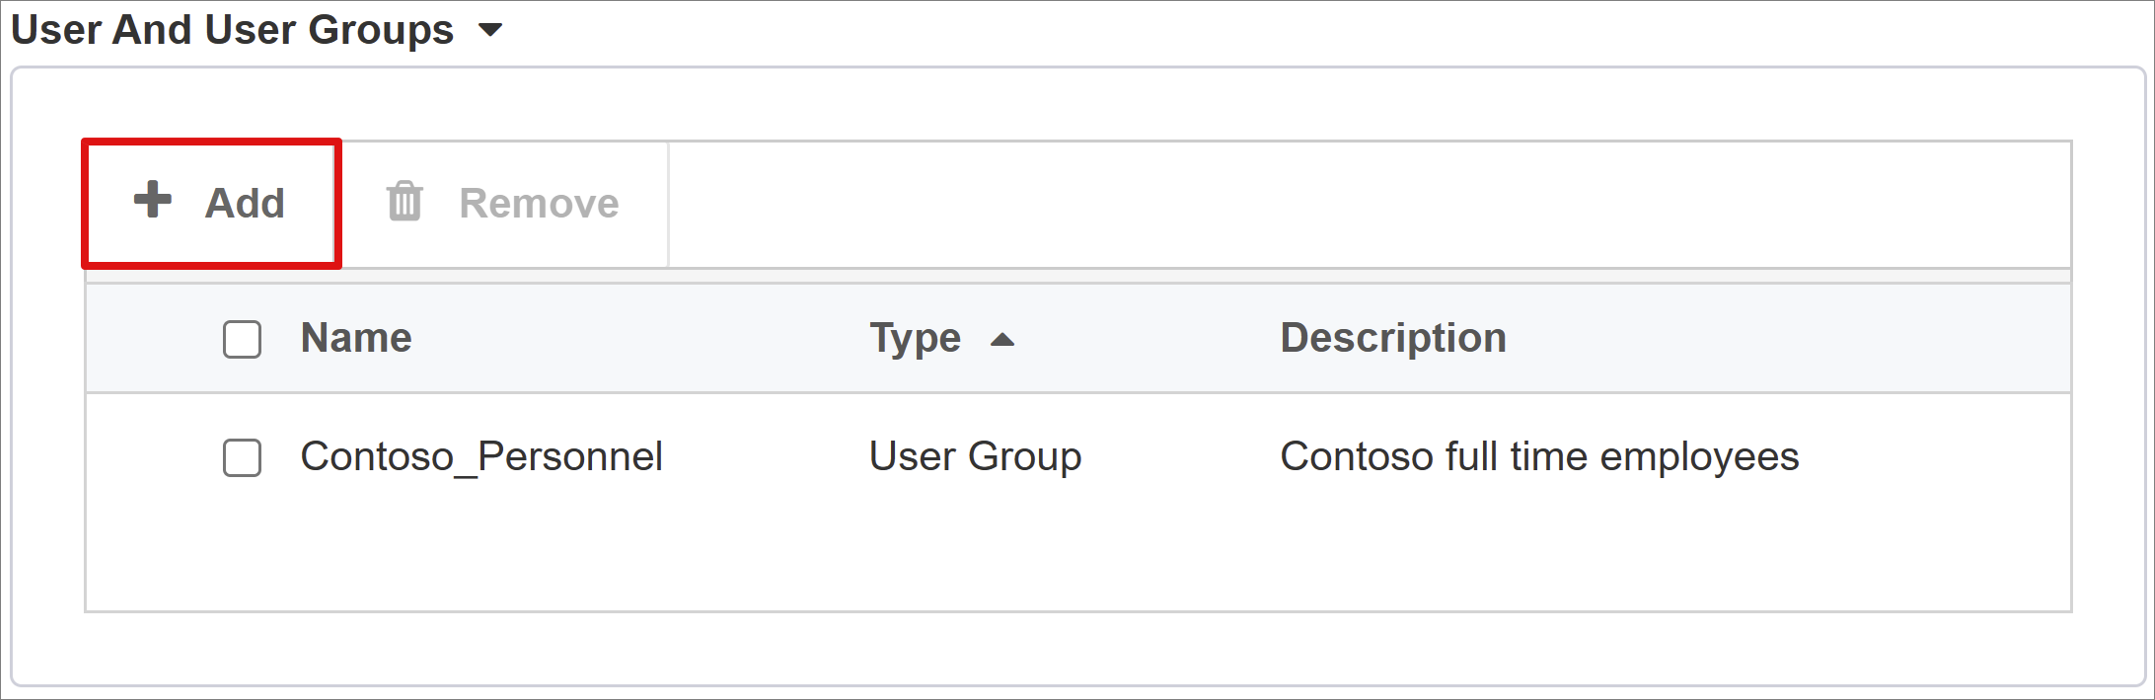 Screenshot of the Add option under User And User Groups.